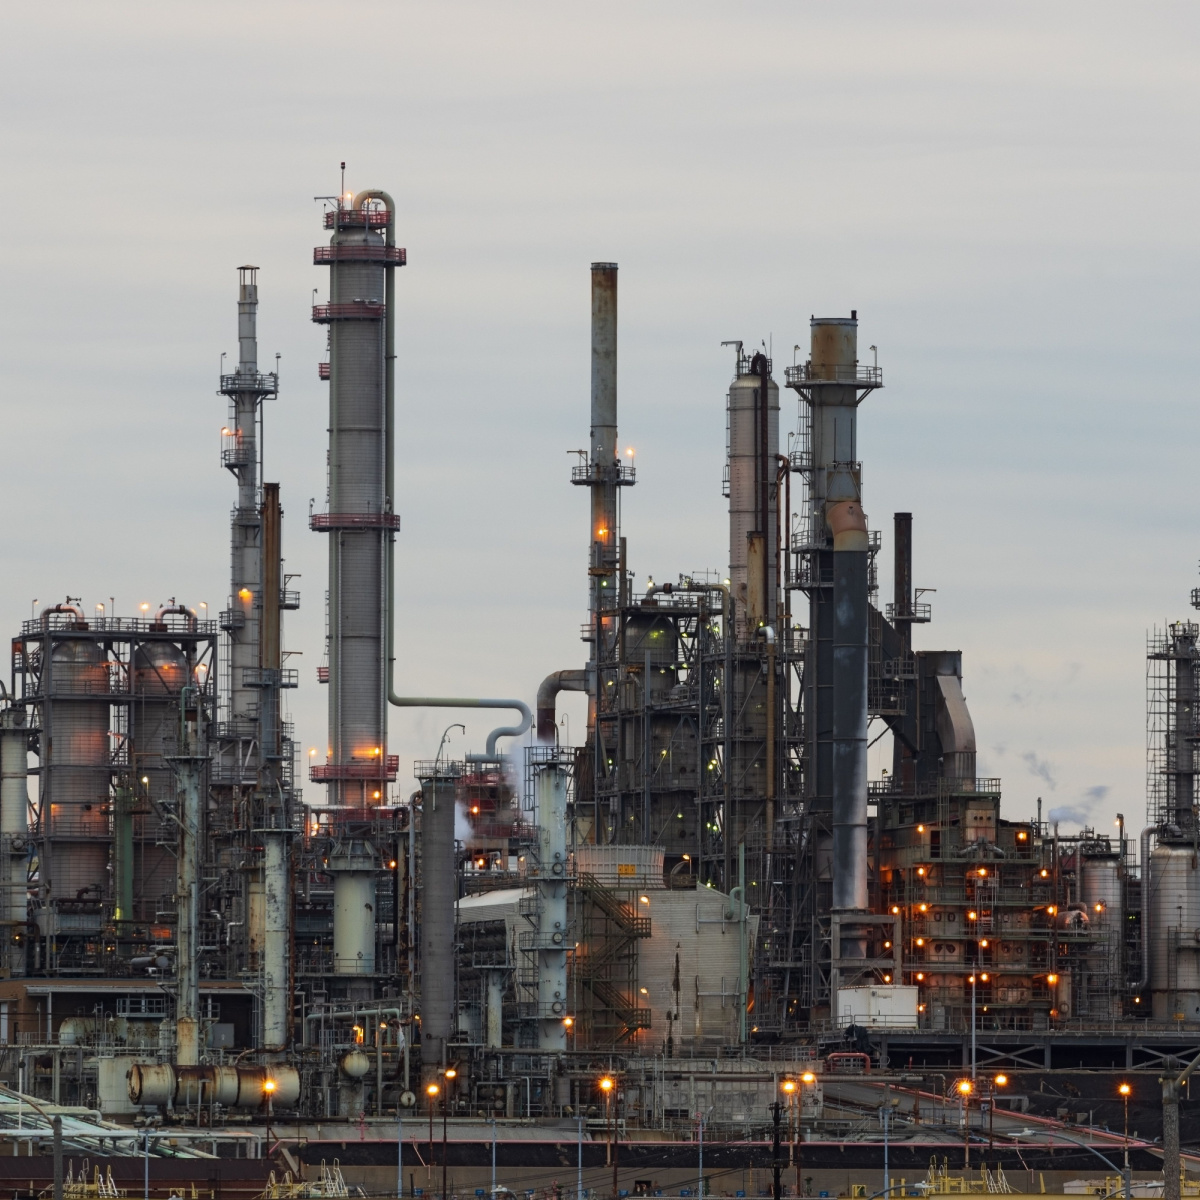 Oil plants are among the most hazardous workplaces, and a Houston oil refinery injury can happen at any moment. 